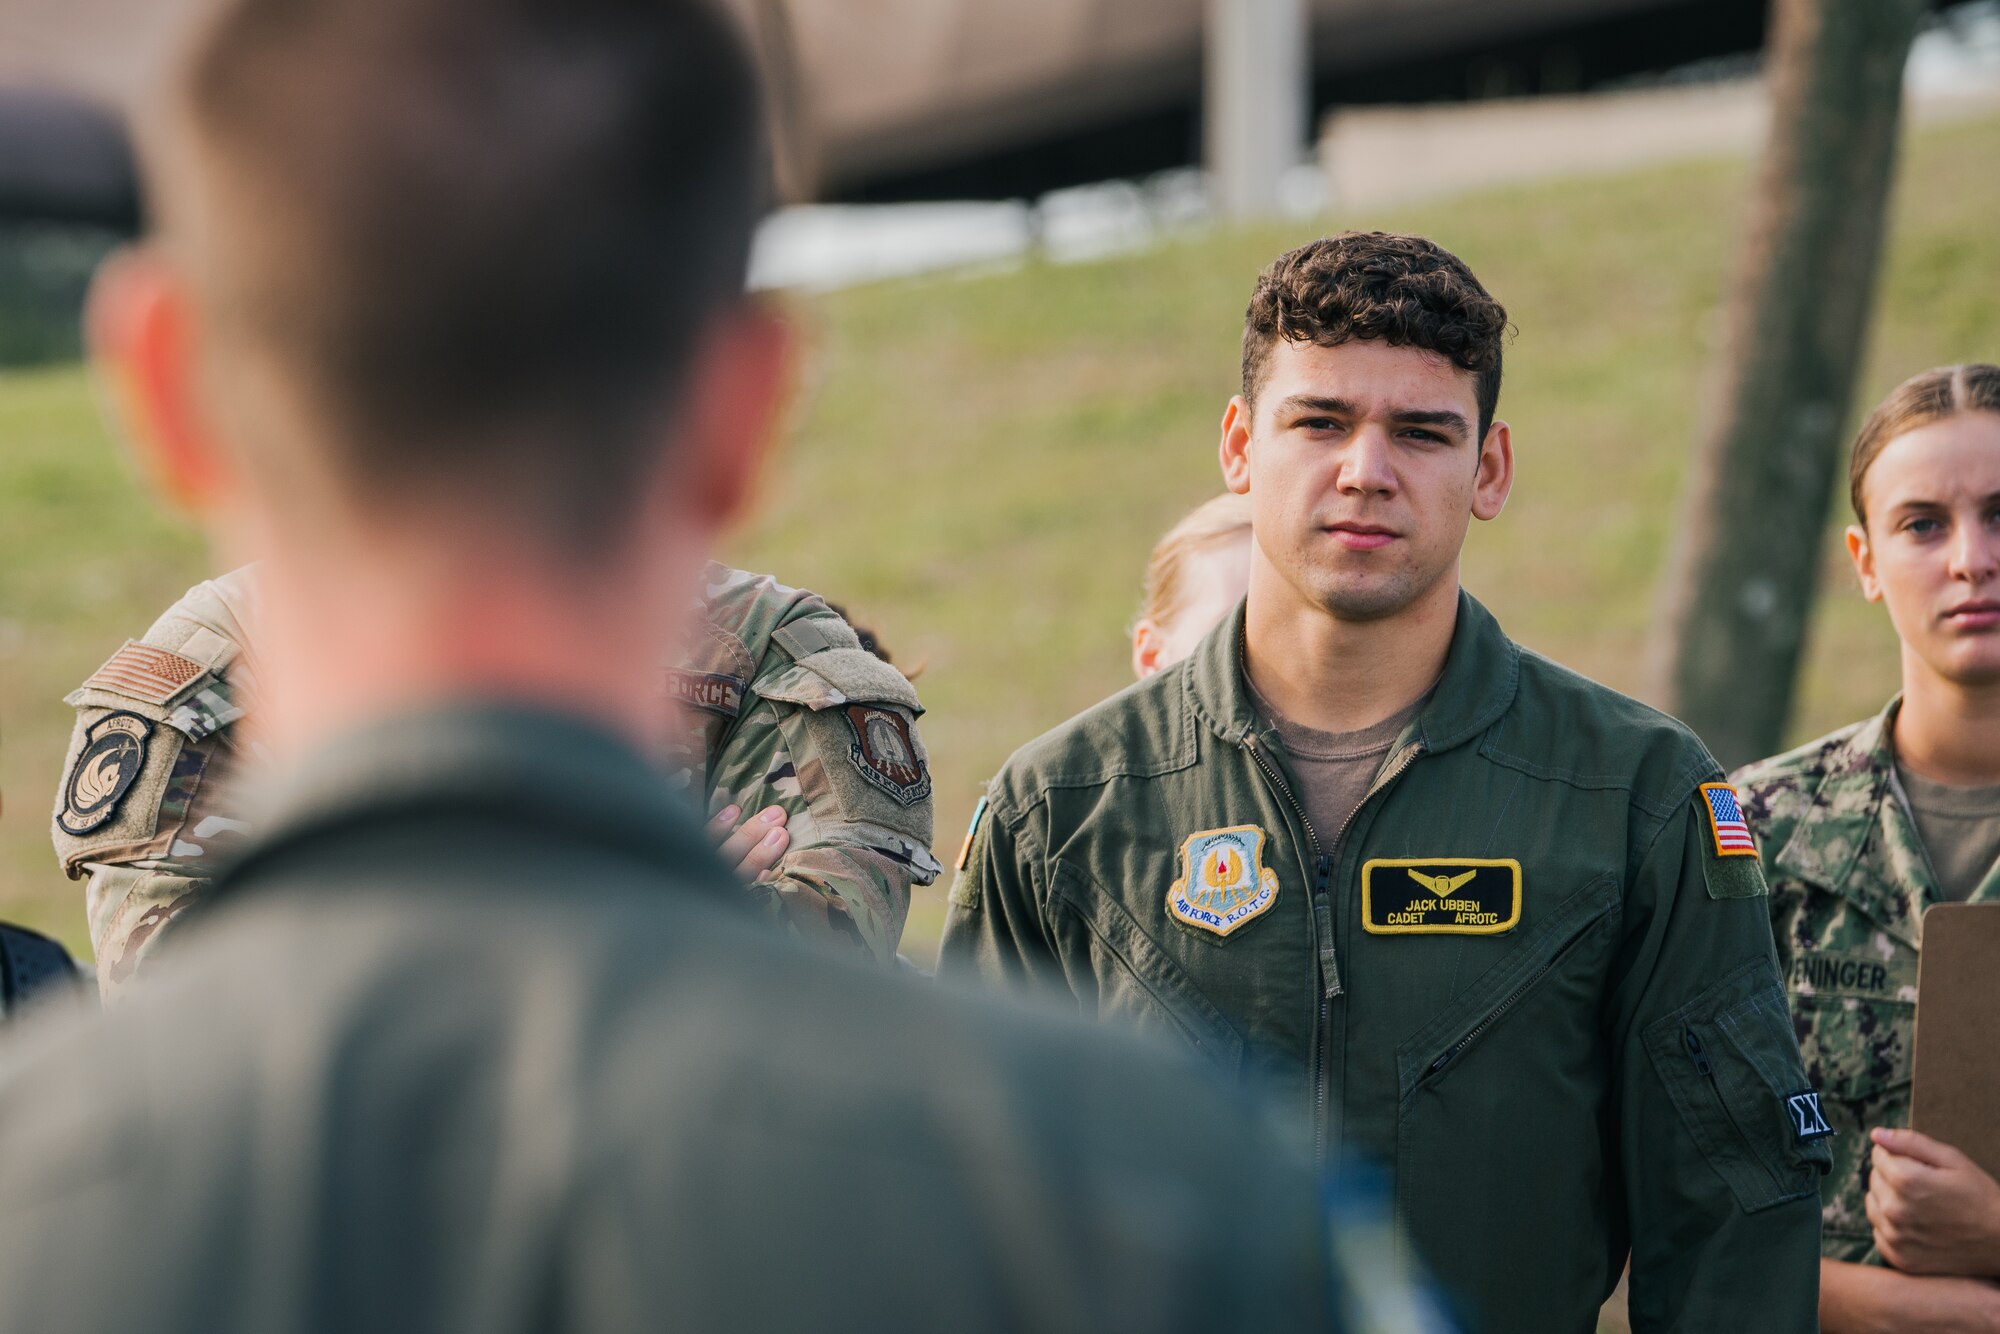 nstructor pilots assigned to the 85th Flying Training Squadron share their experiences in the Air Force with participants during an Aviation Inspiration Mentorship event at MacDill Air Force Base, Florida, Oct. 15, 2022.